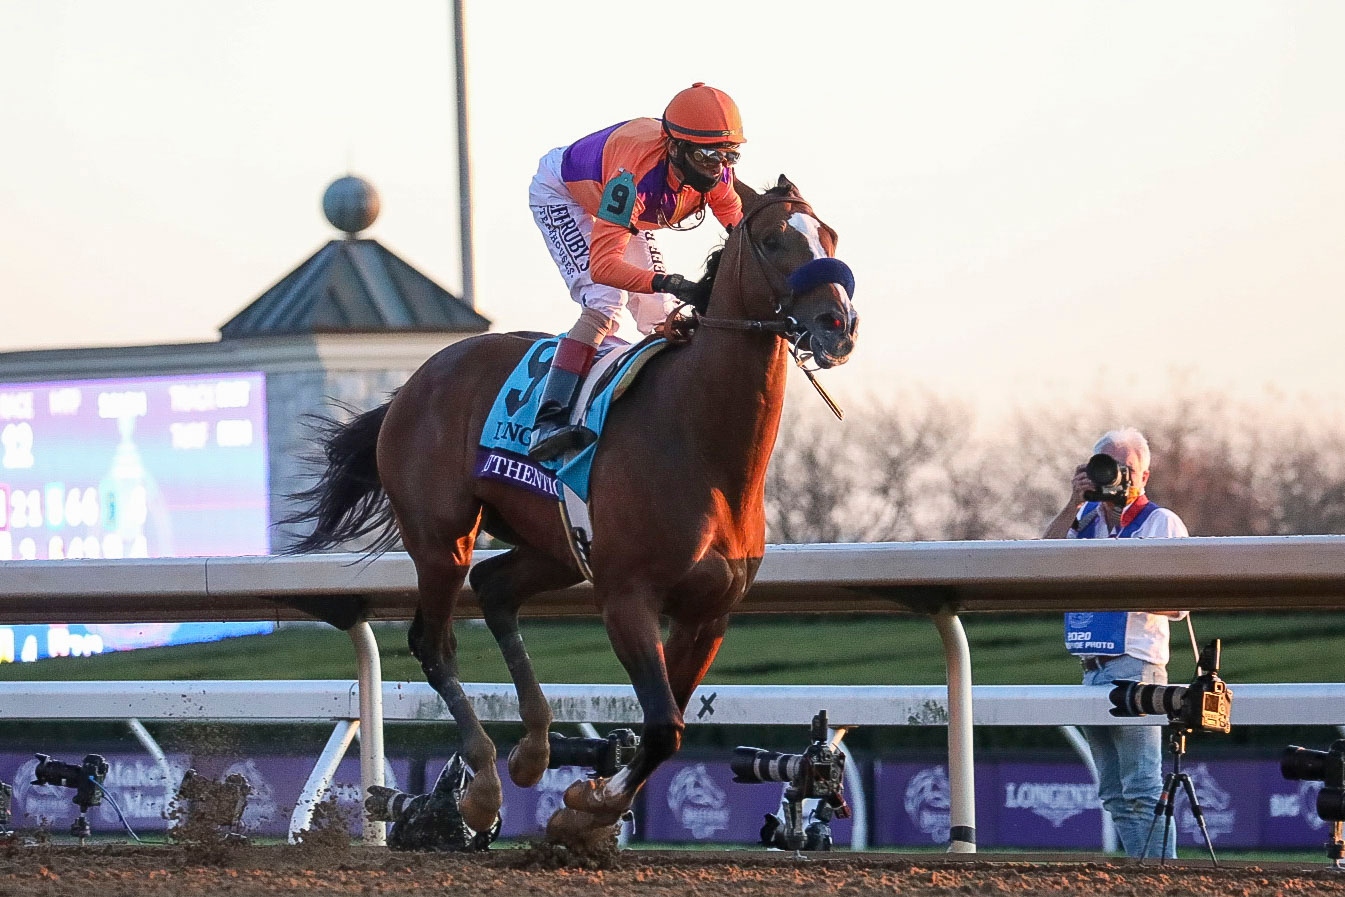 Breeders Cup Classic Authentic leads wiretowire in dominant win